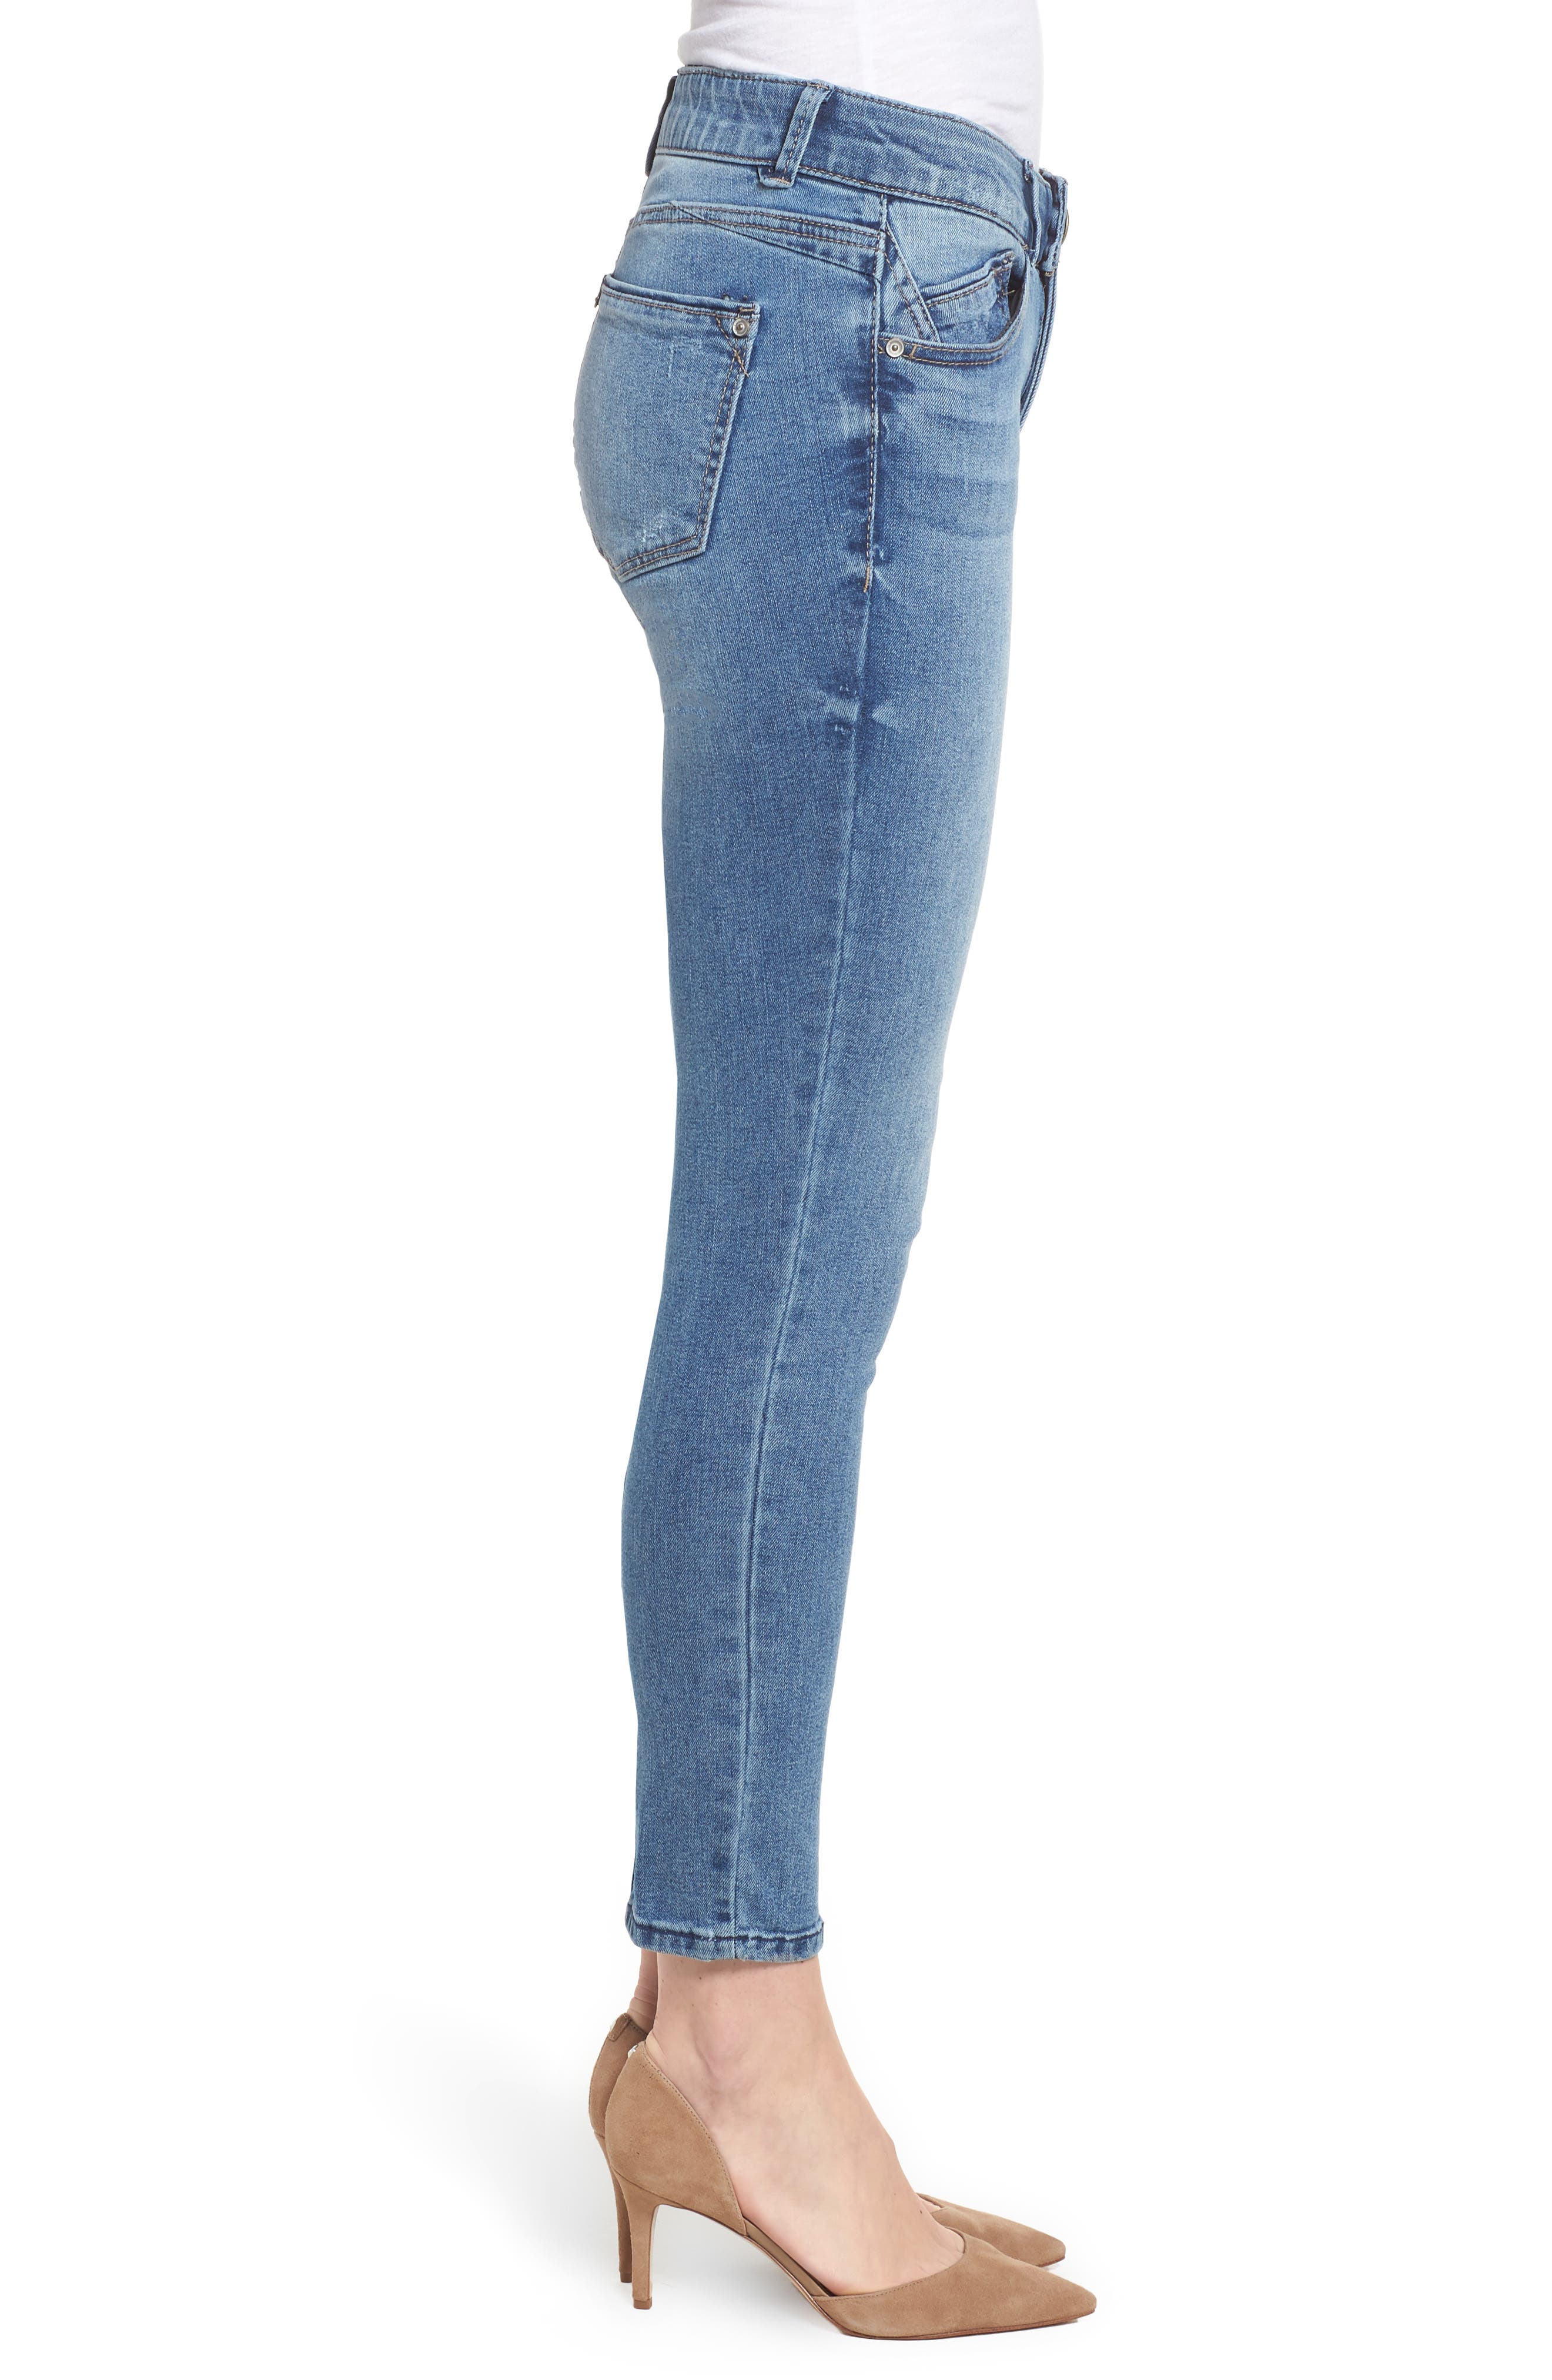 ankle skimming jeans